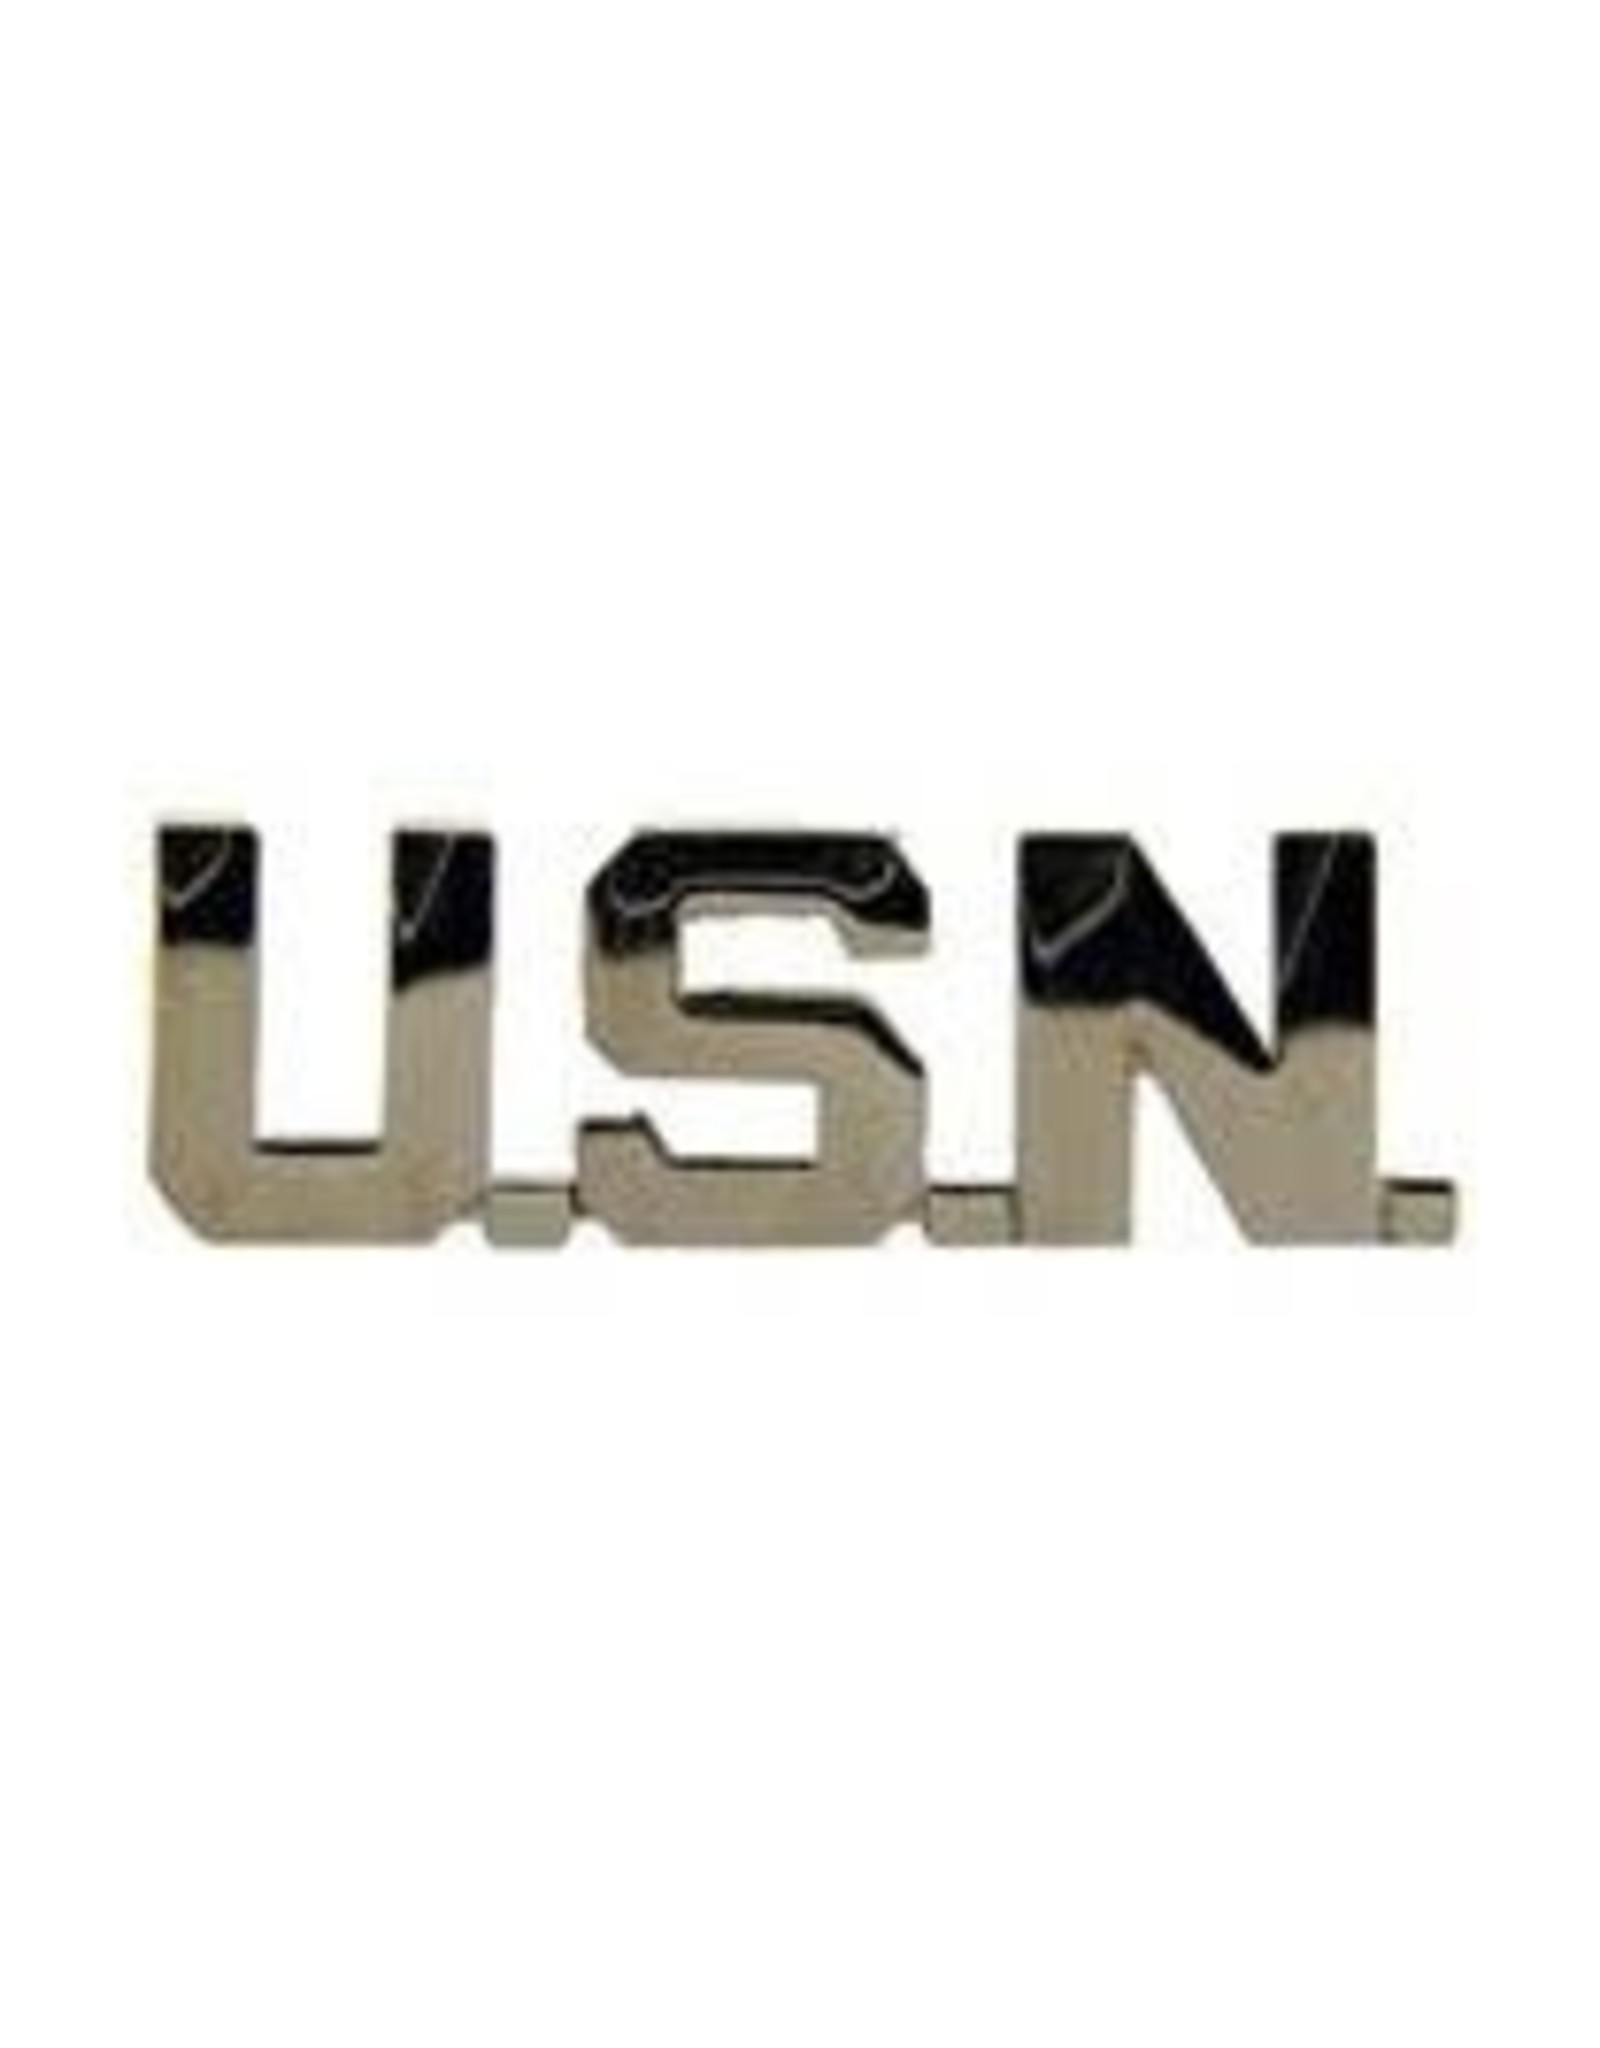 Pin - USN Scroll Letters Silver